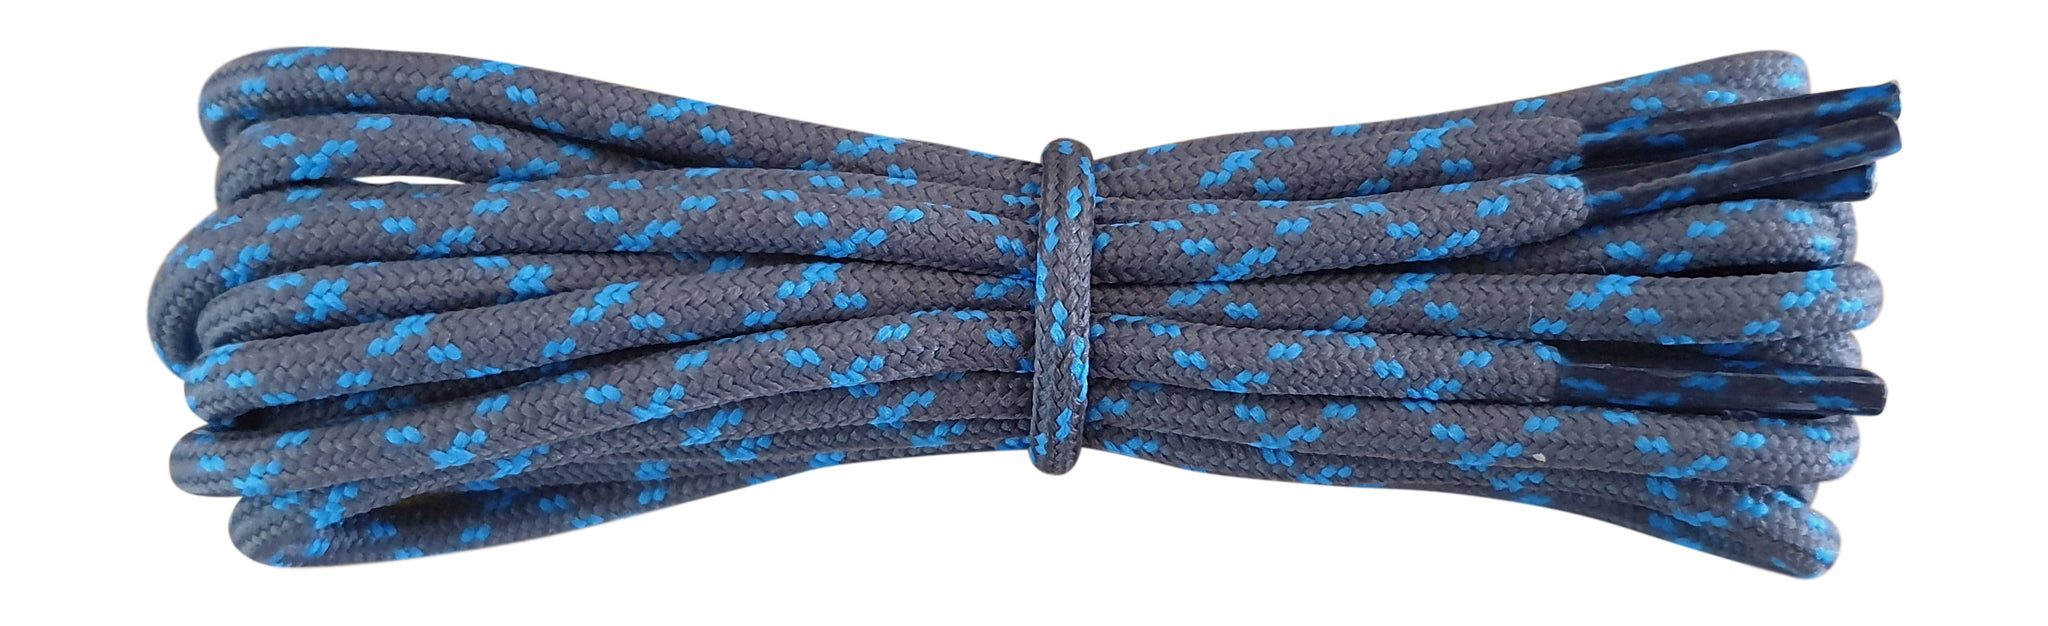 Strong round Shoelaces Dark Grey with Blue flecks for walking shoes or trainers. - fabmania shoe laces